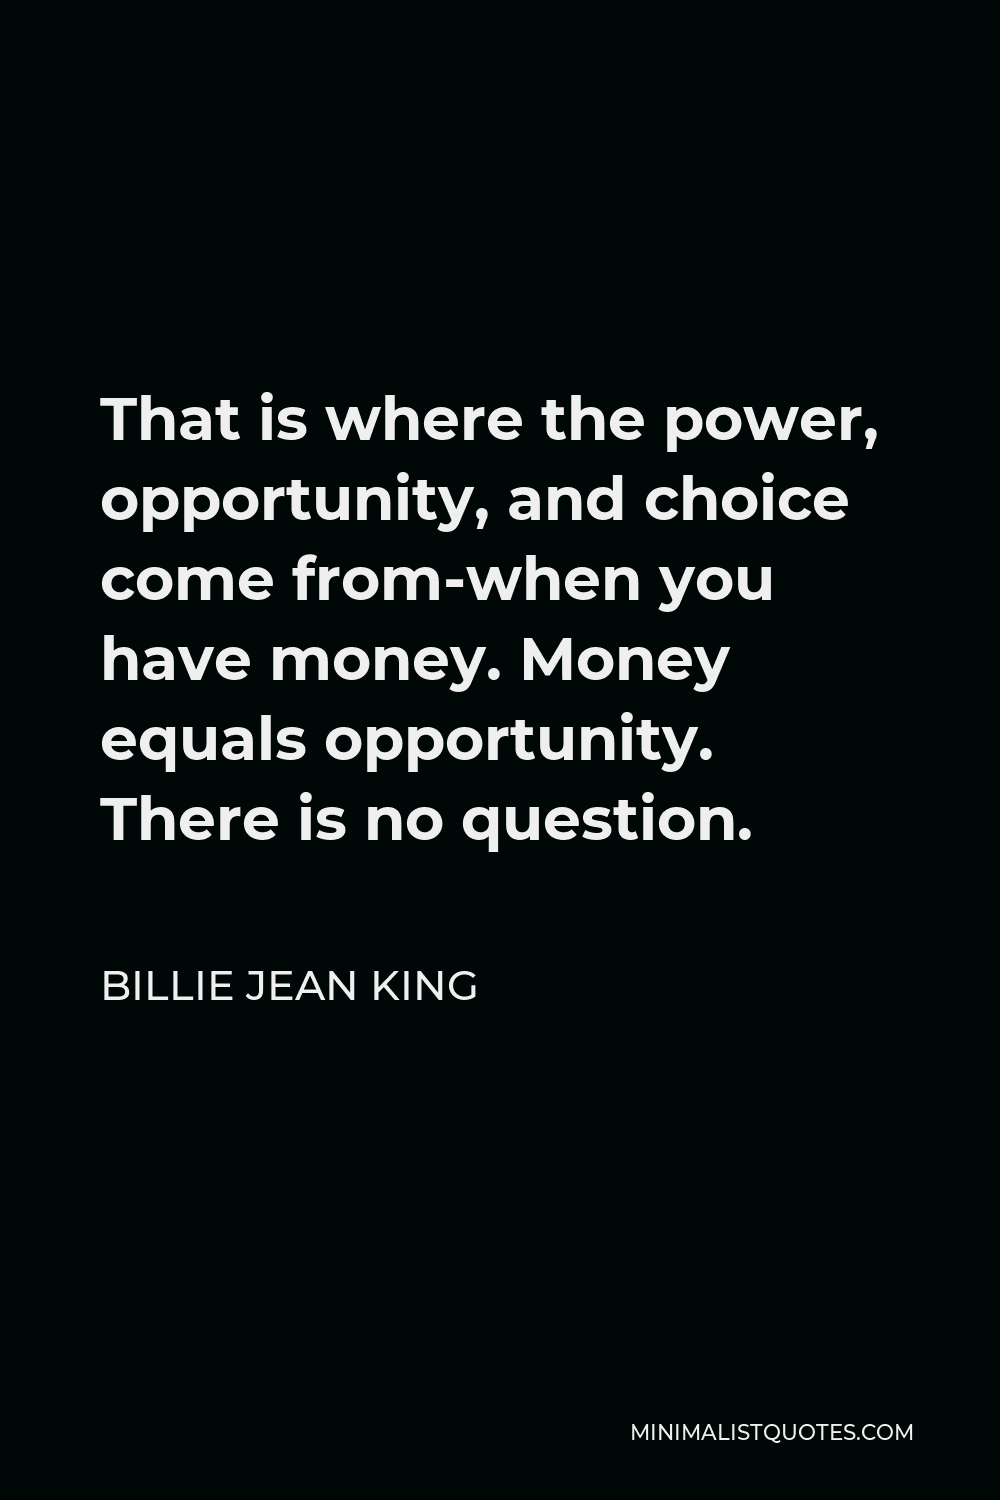 Billie Jean King Quote - That is where the power, opportunity, and choice come from-when you have money. Money equals opportunity. There is no question.